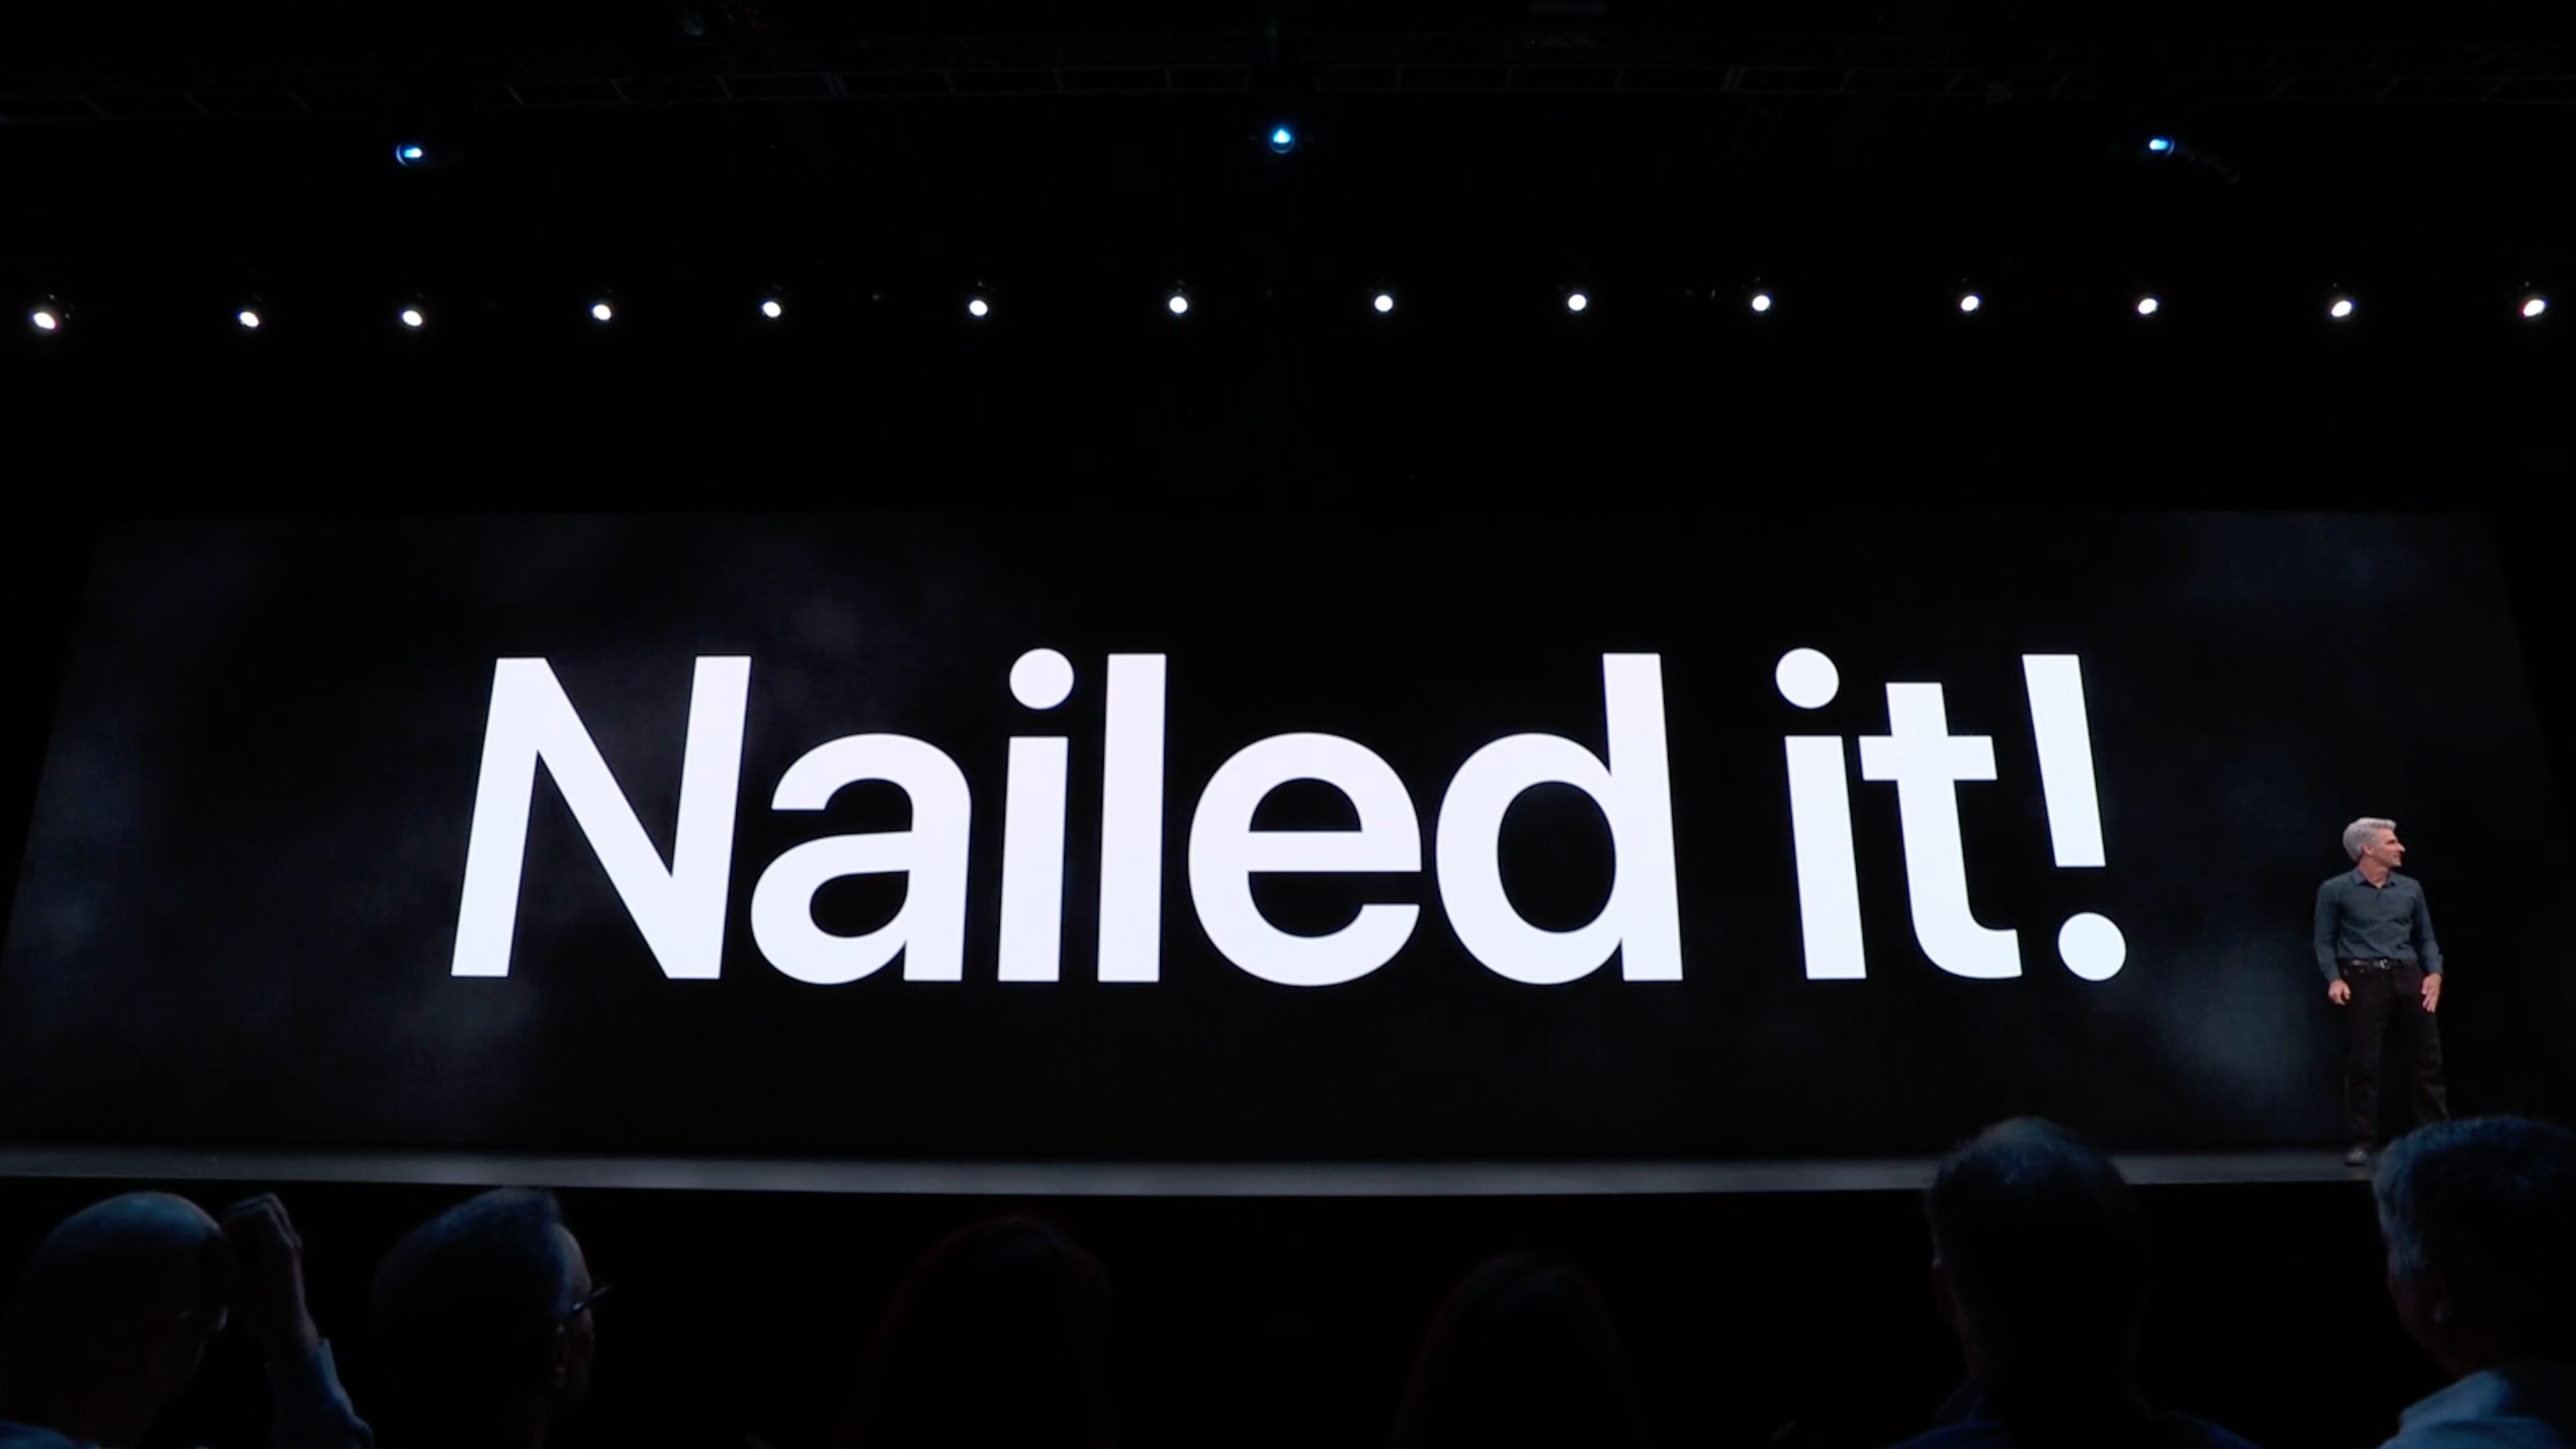 Nailed it! Craig Federighi onstage during the WWDC 2019 keynote.